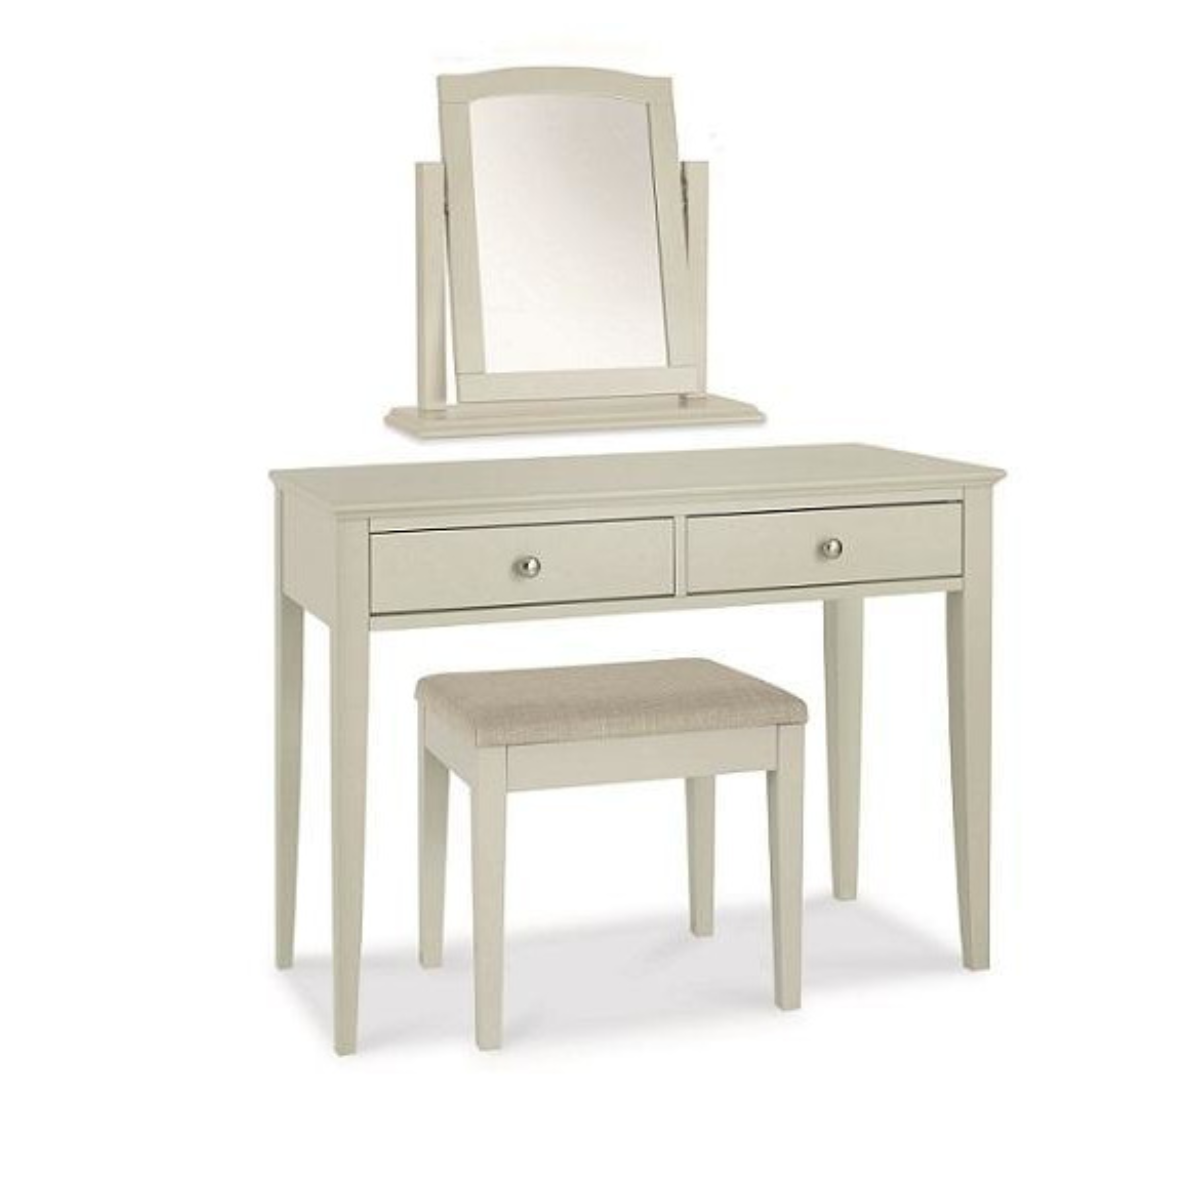 Ashby Dressing Table Set from Upstairs Downstairs Furniture in Lisburn, Monaghan and Enniskillen